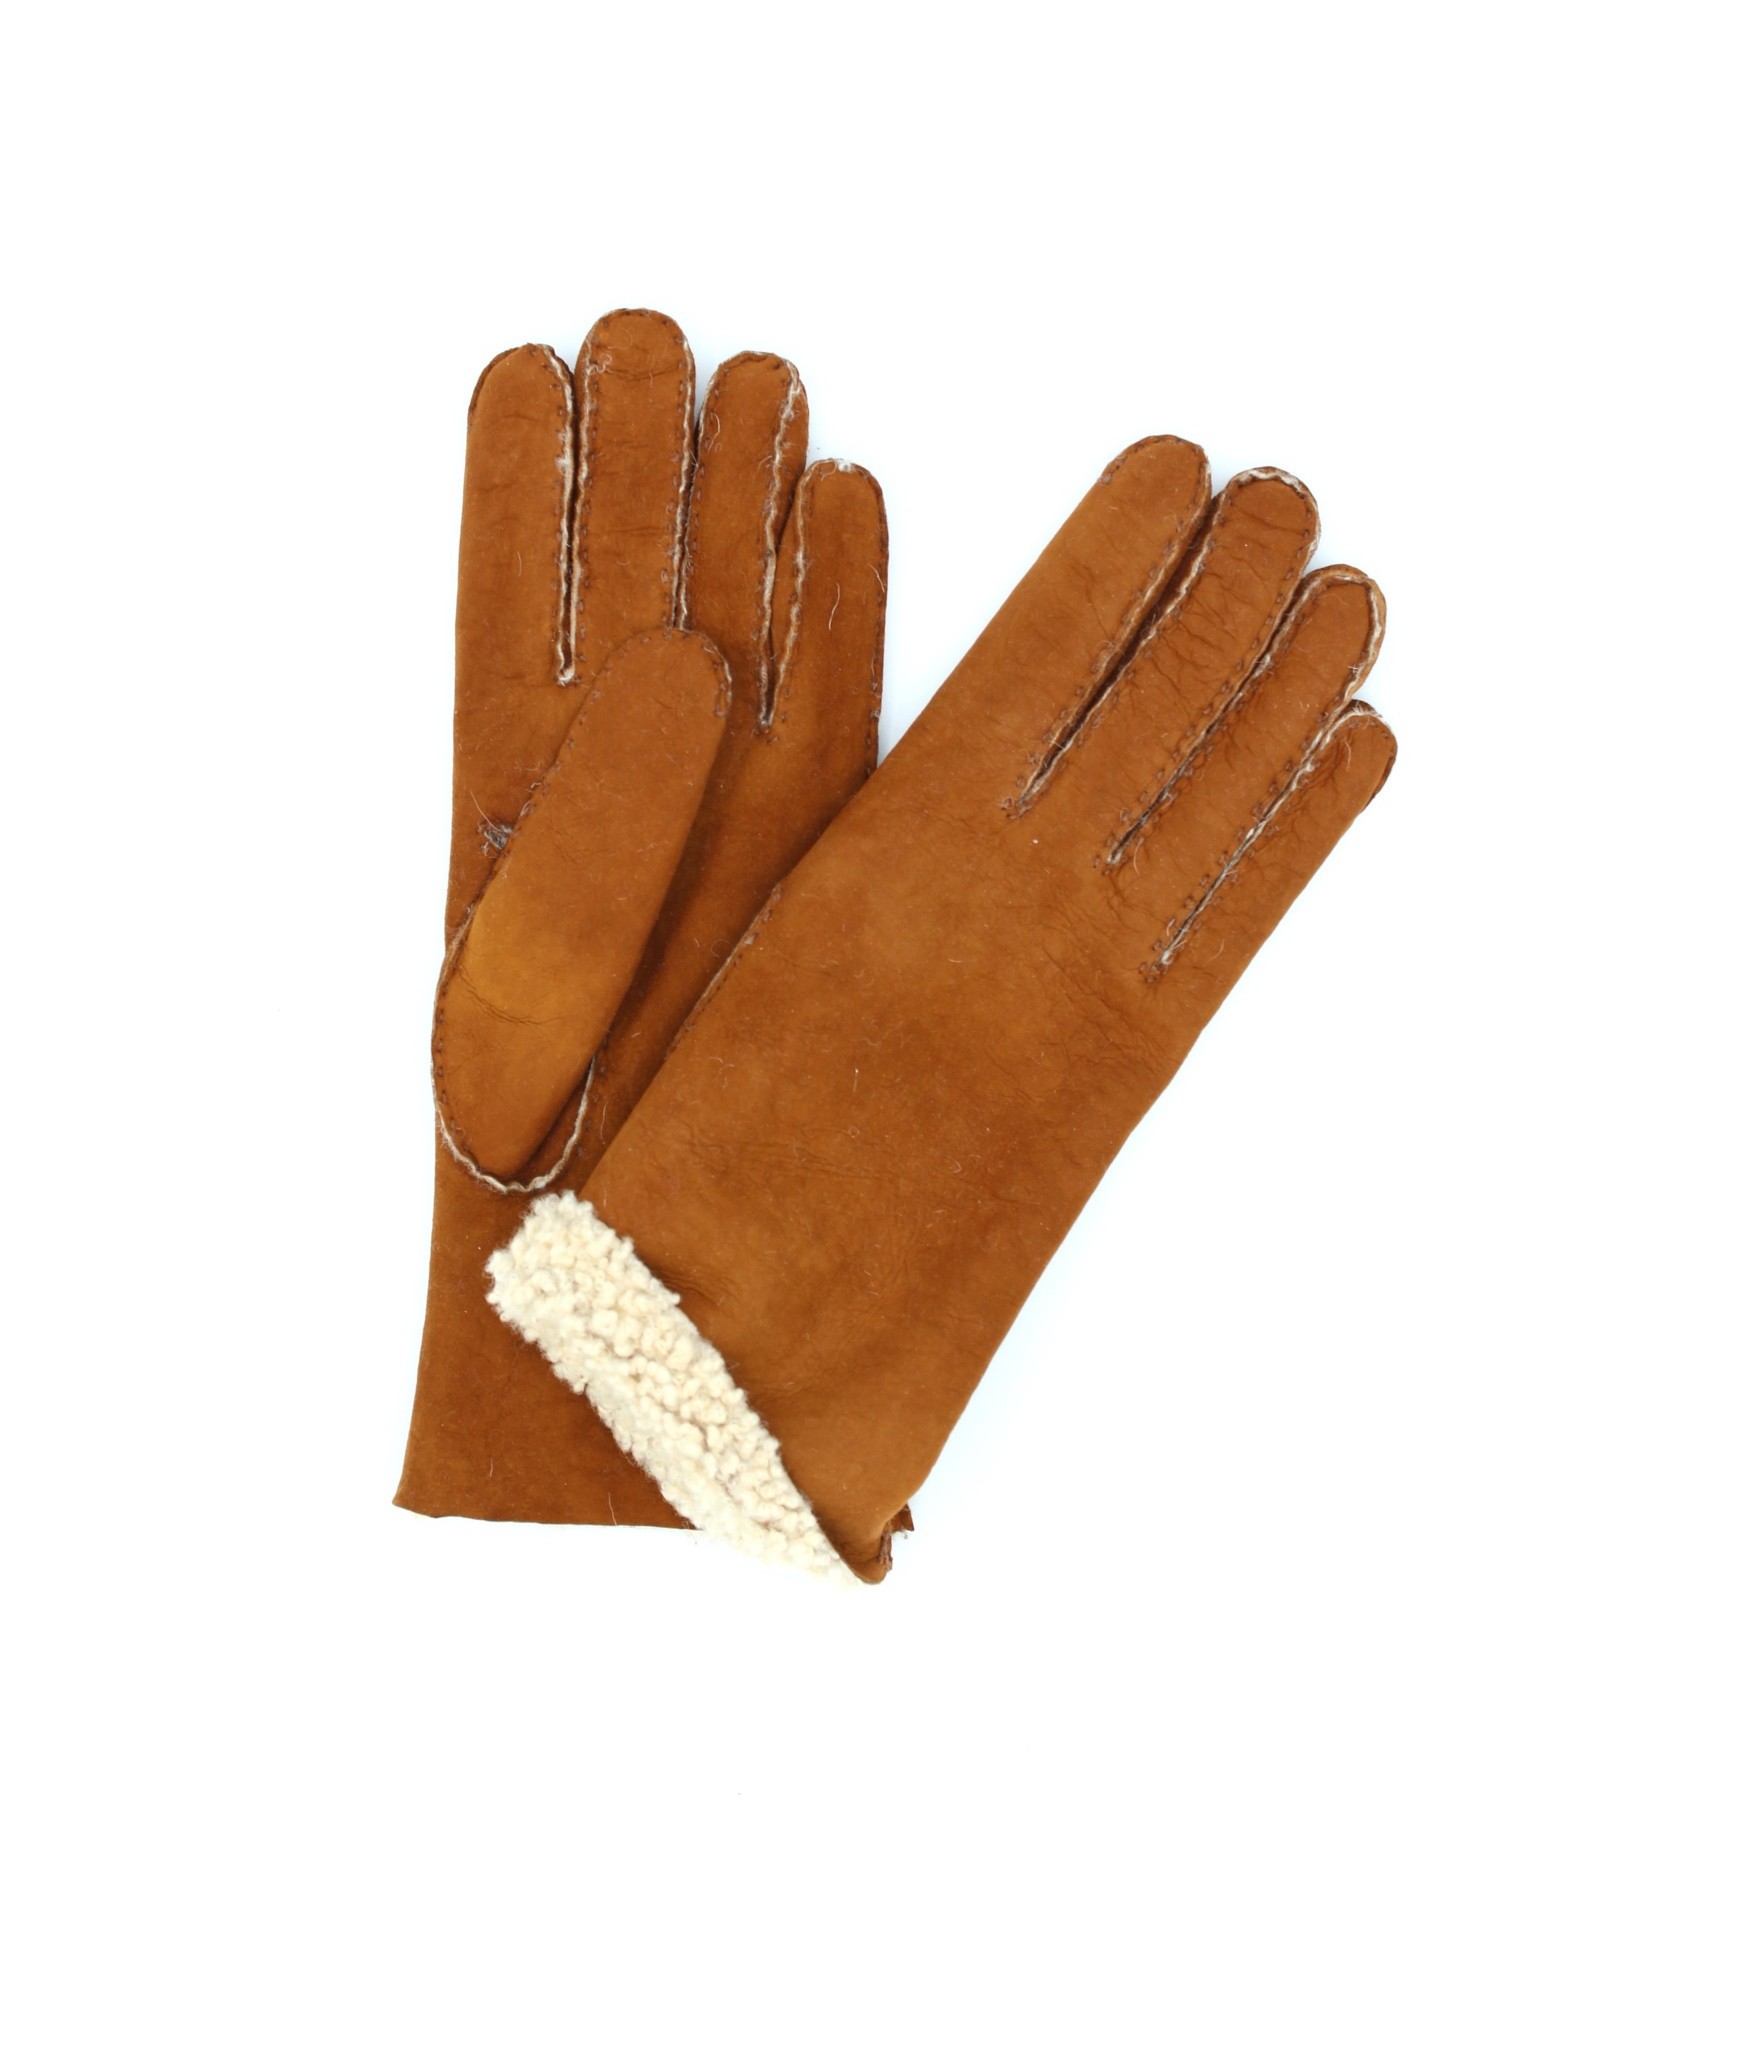 1174  Sheep Skin inside-out Gloves Hand Sewn Tan 